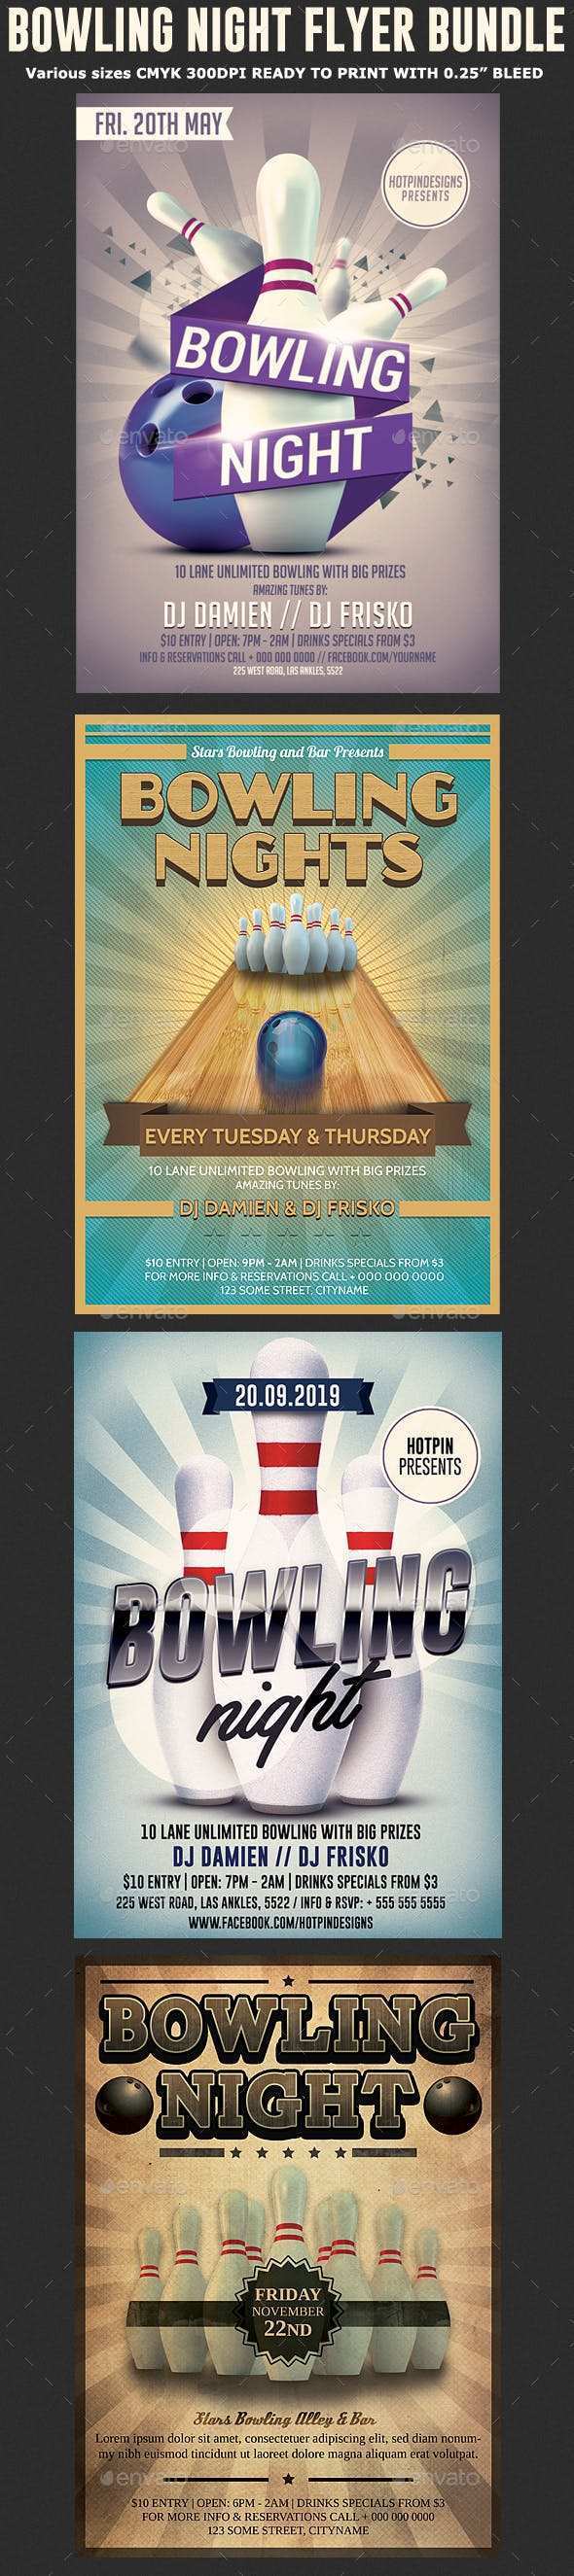 88 Format Bowling Night Flyer Template by Bowling Night Flyer Template